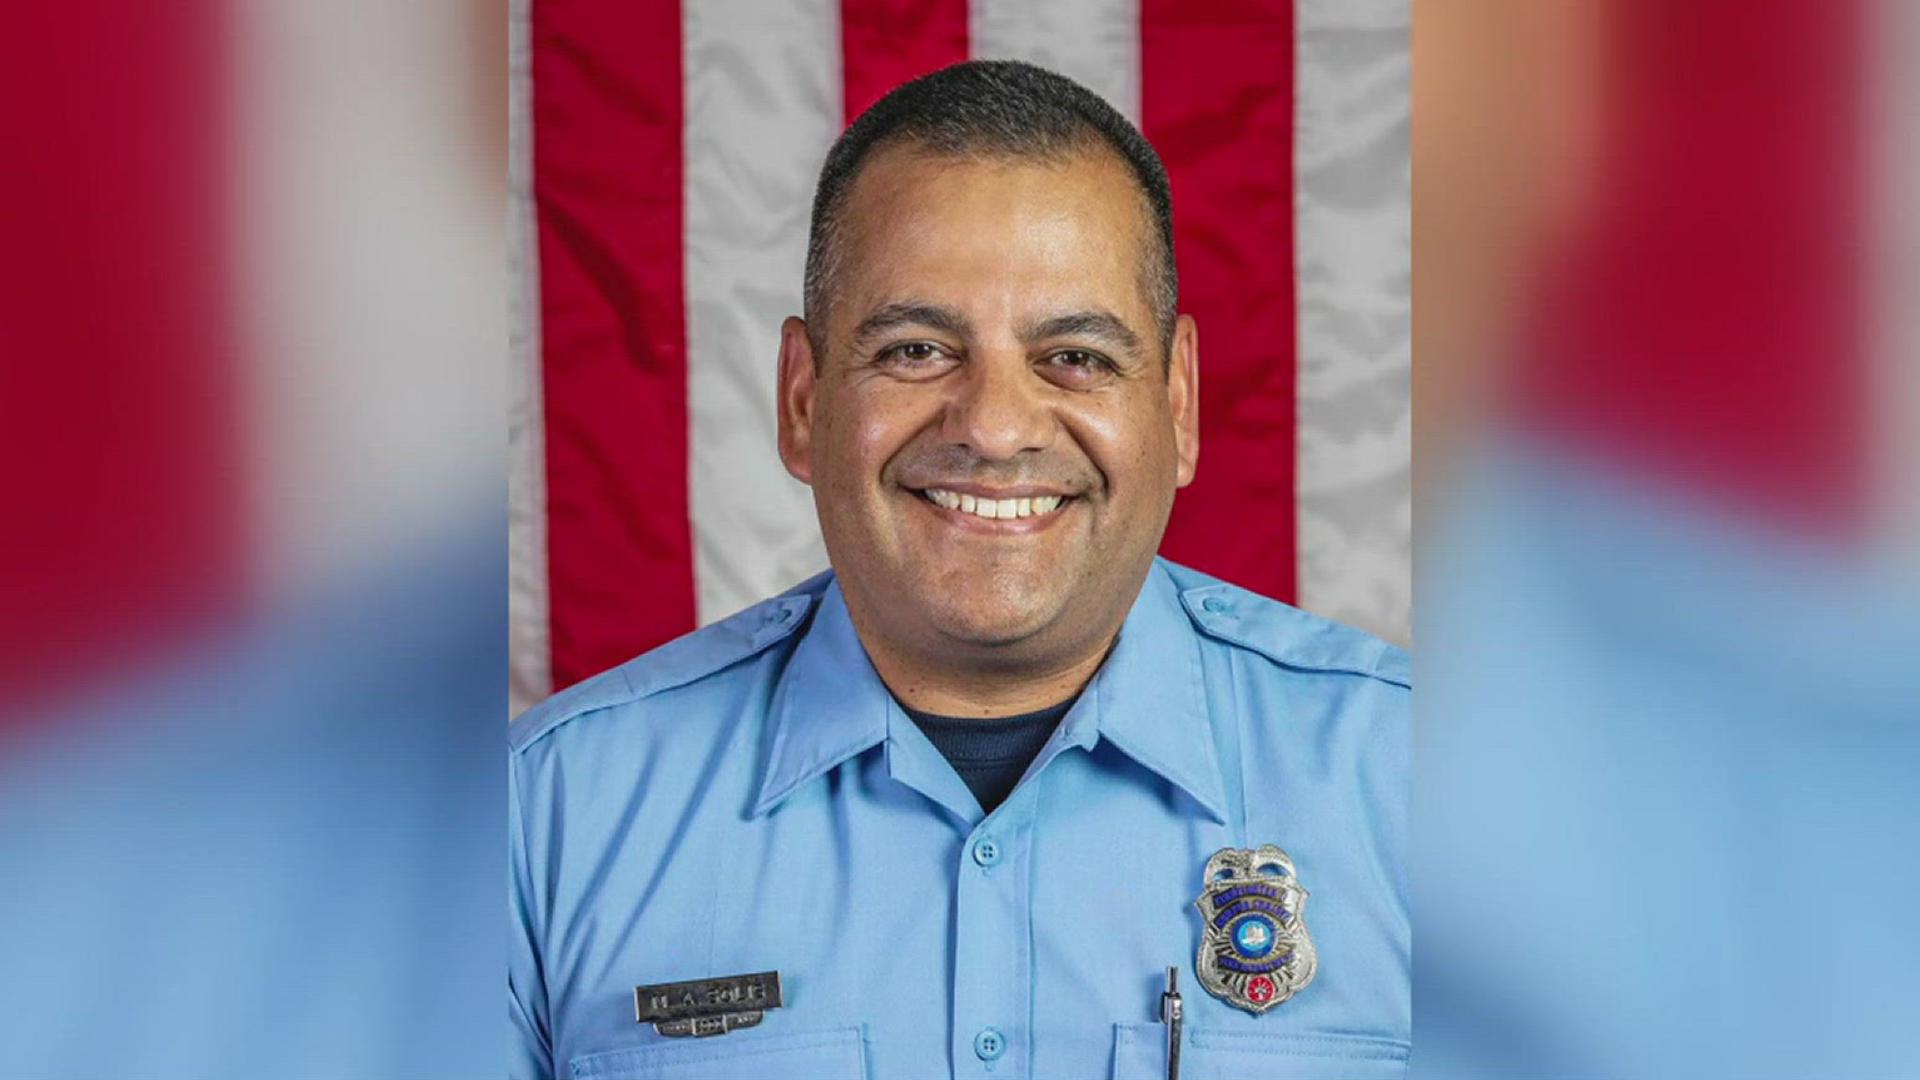 The 23-year veteran died Thursday of colon cancer.